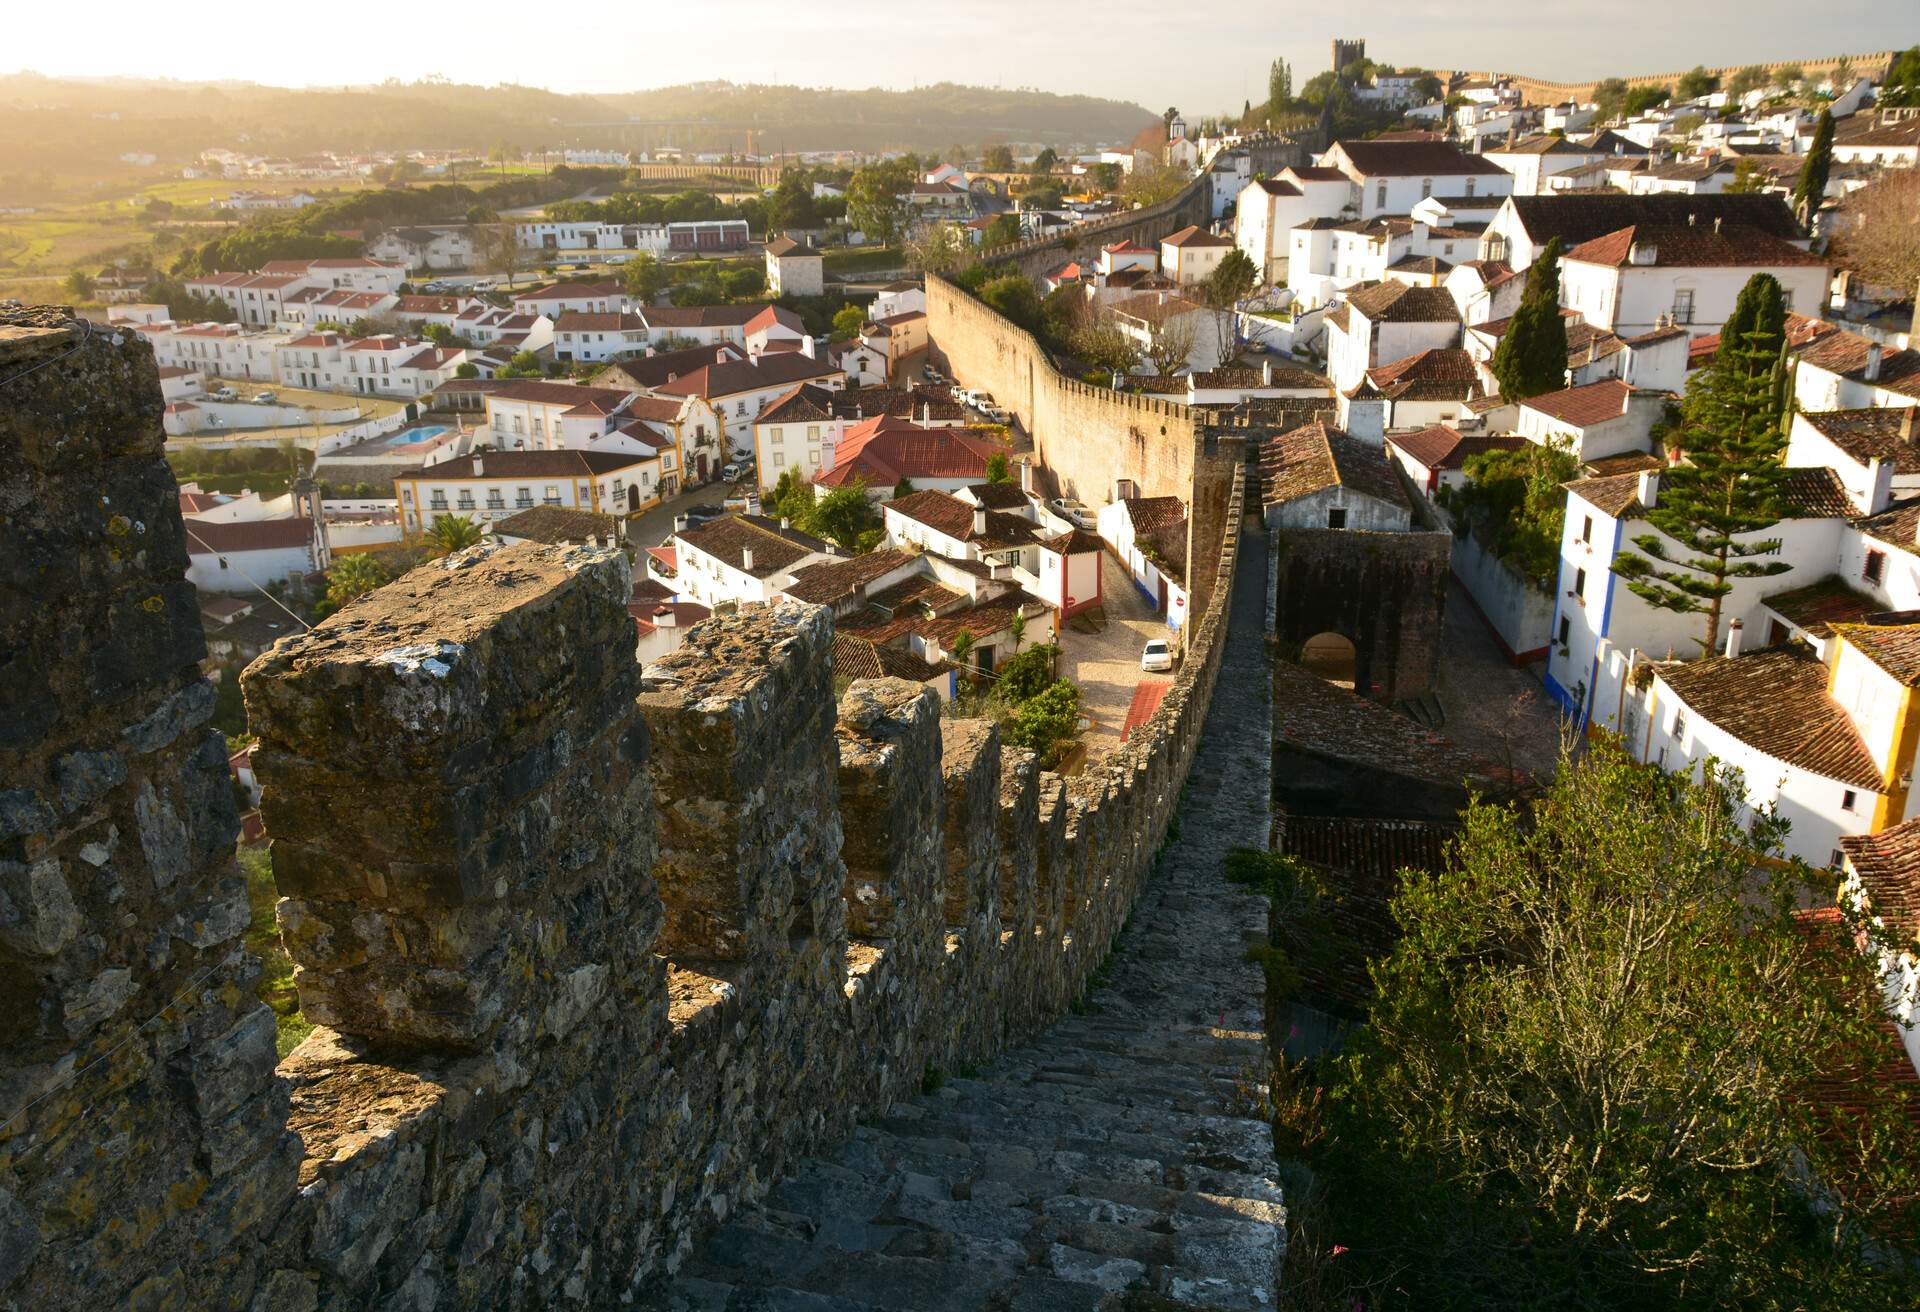 The sun rising over the walled city of Obidos. Guard towers can be seen in the distance.